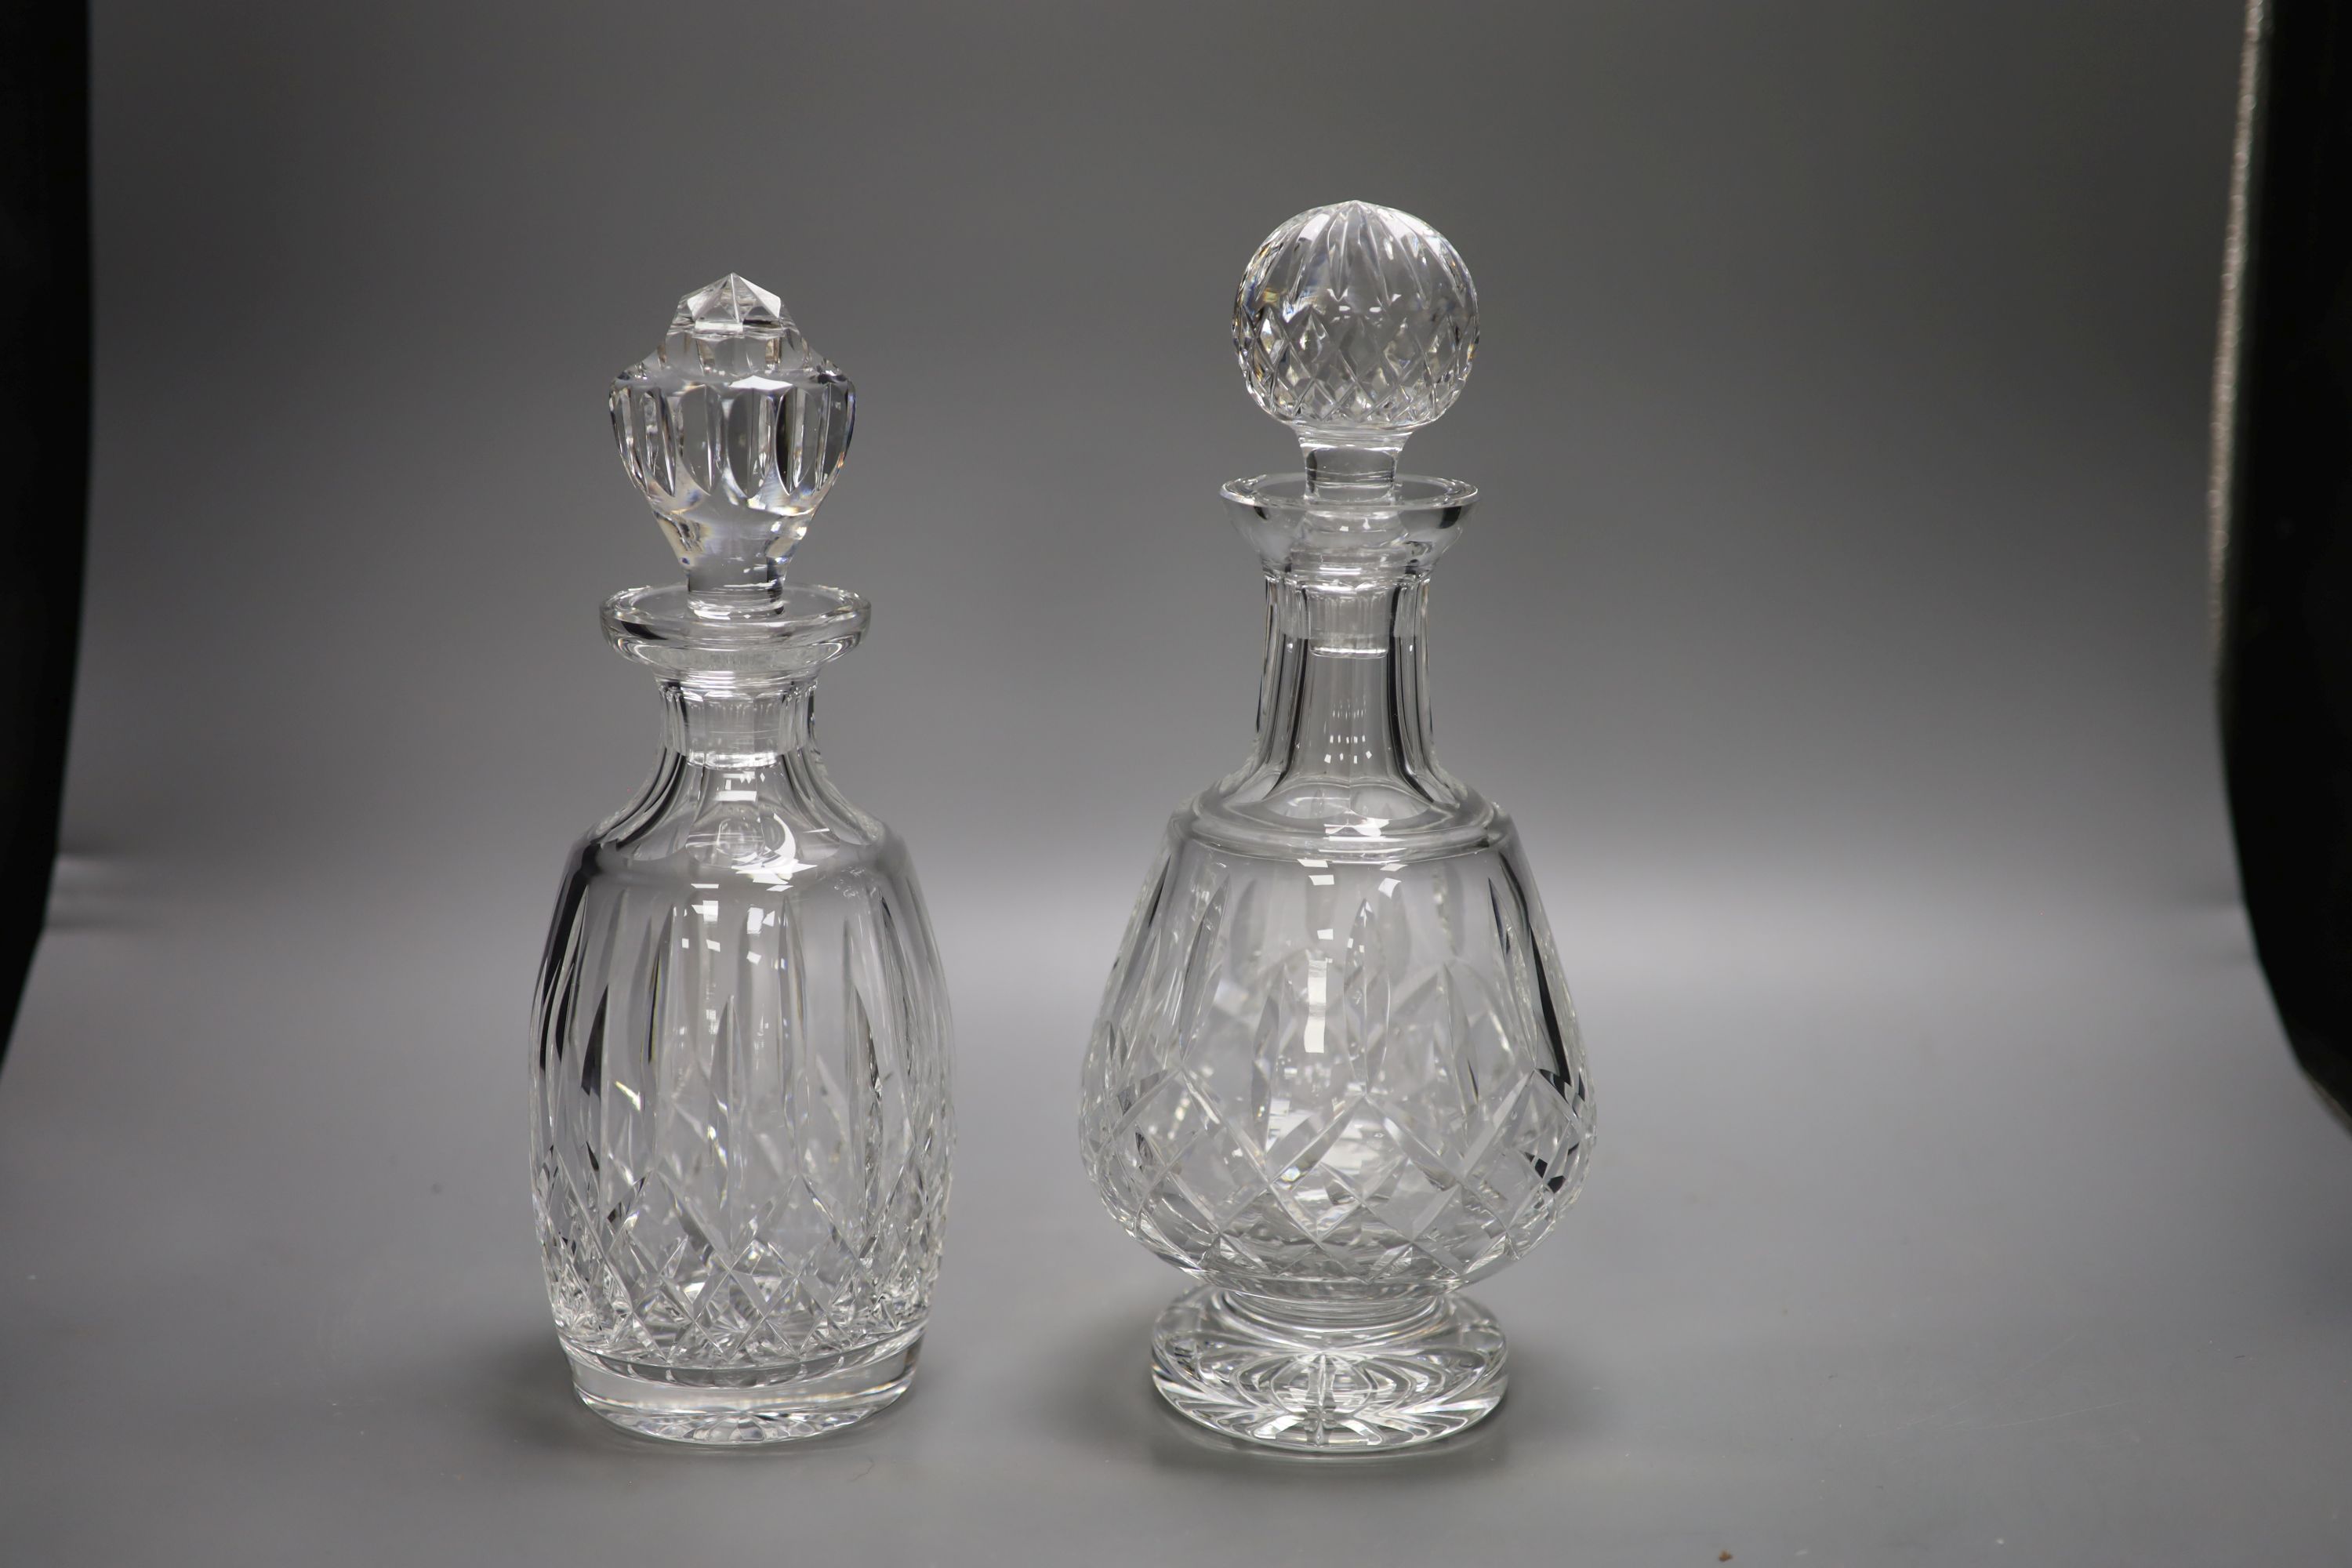 Two Waterford crystal decanters and stoppers, height 30cm - Image 2 of 3